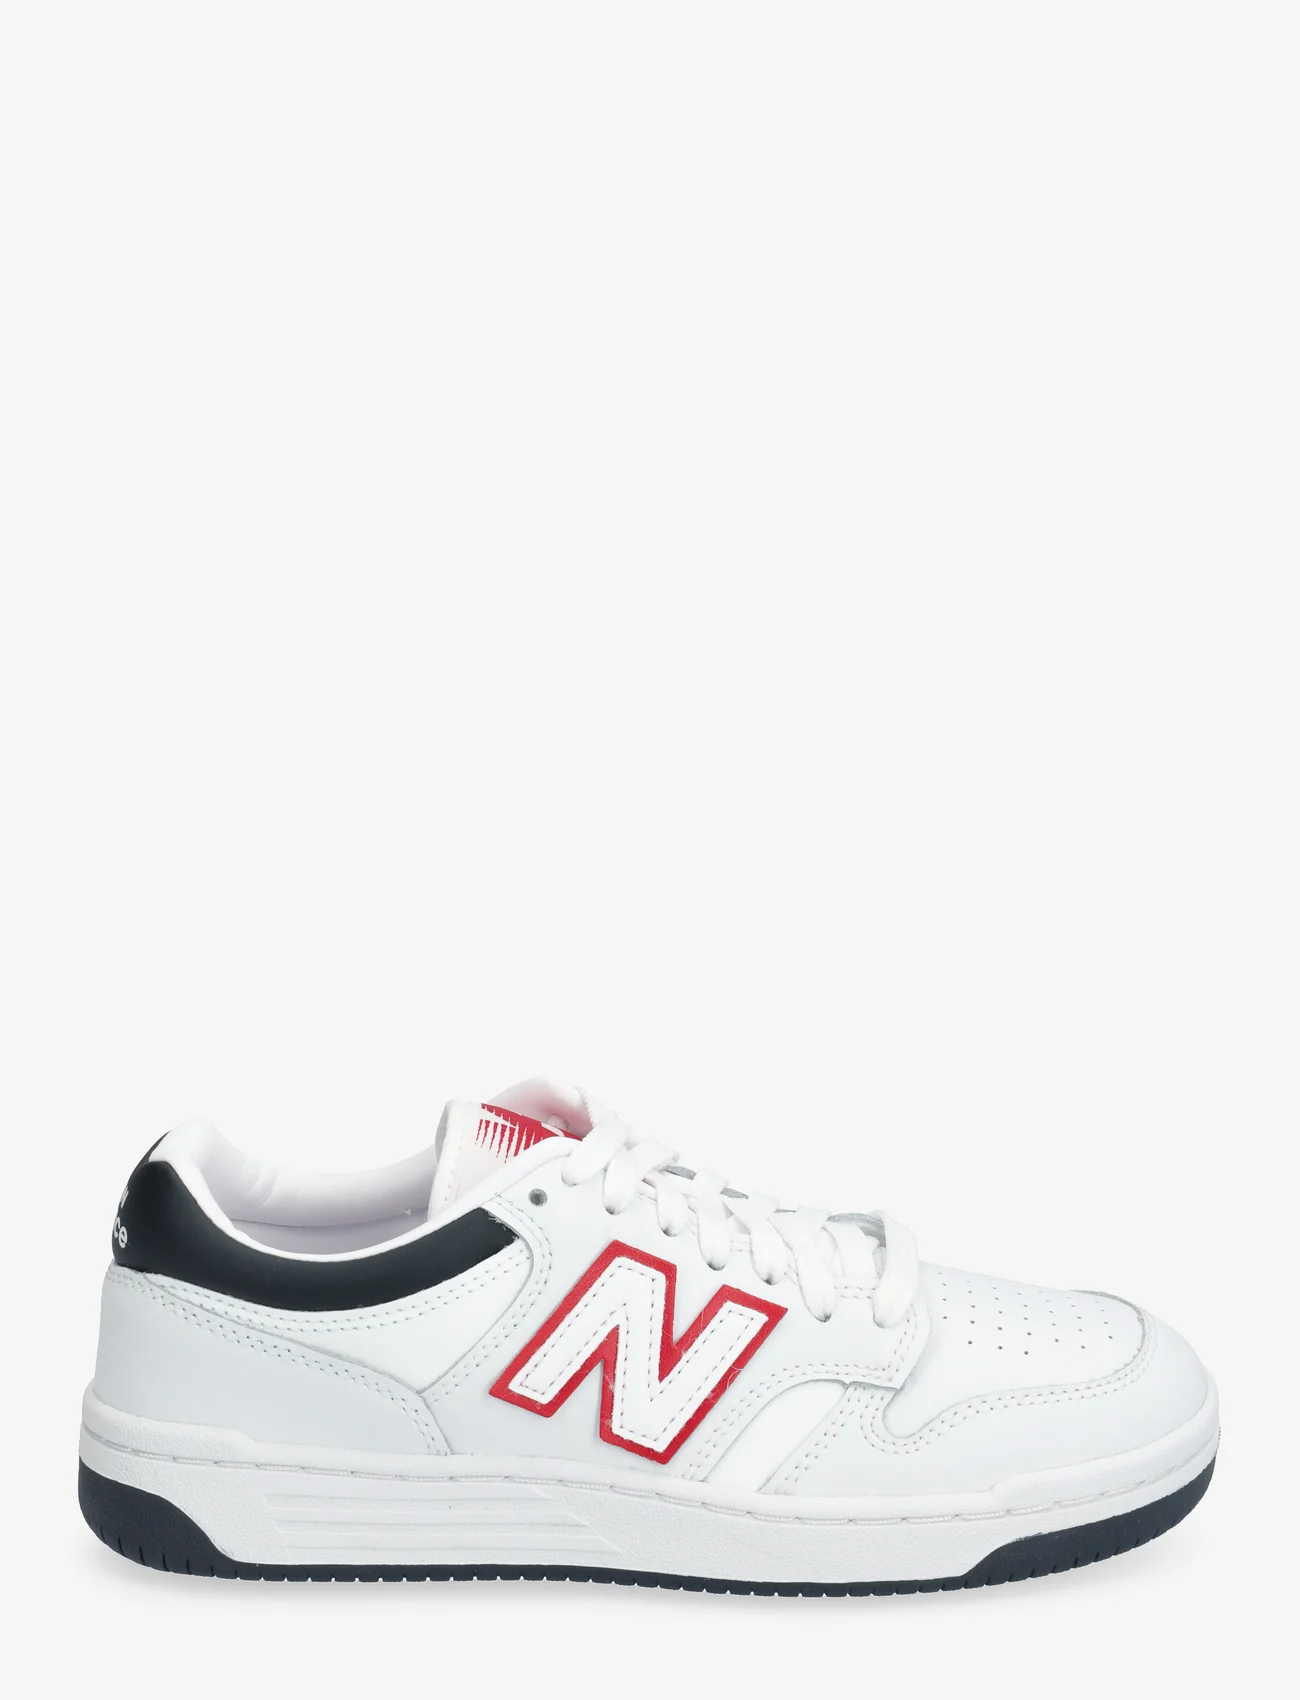 New Balance - New Balance BB480 - low top sneakers - white/navy - 1